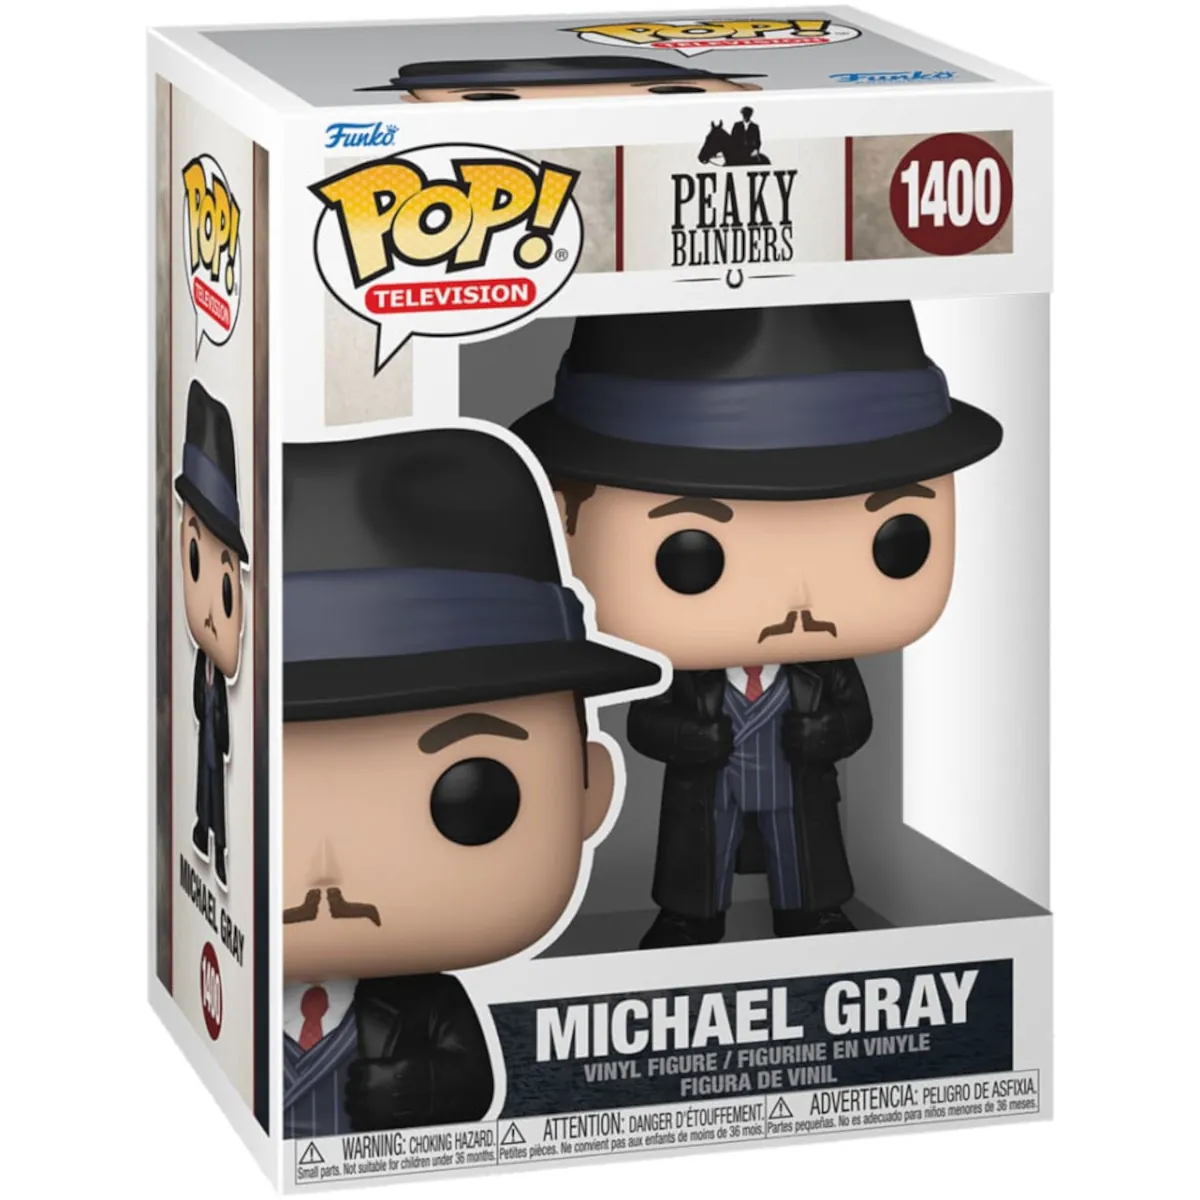 Funko Pop Television Peaky Blinders Michael Gray Collectable Vinyl Figure Box